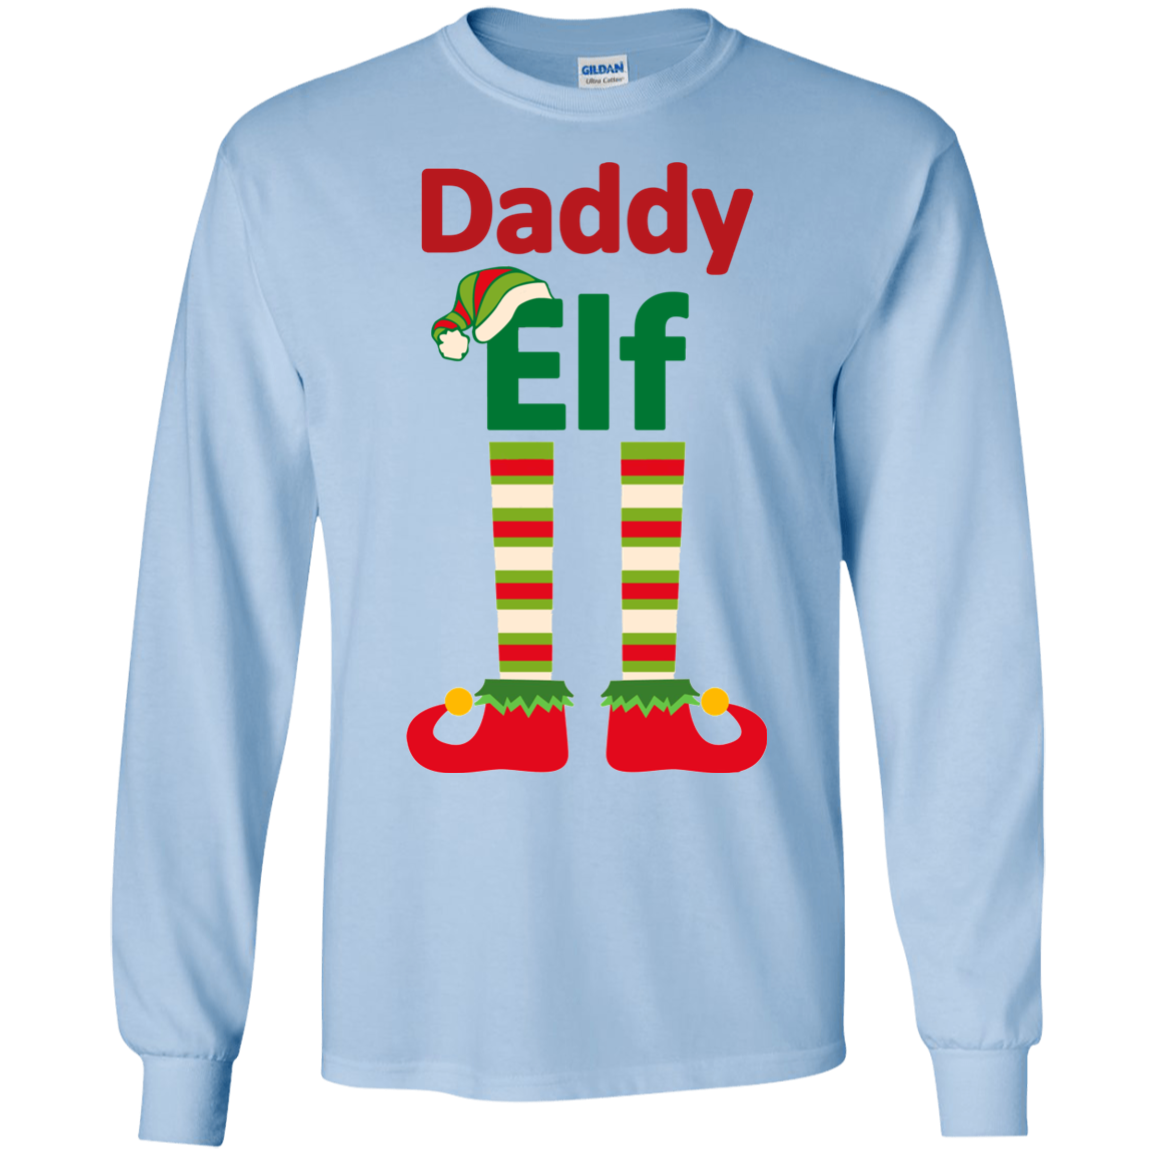 Daddy Elf - Gifts4family